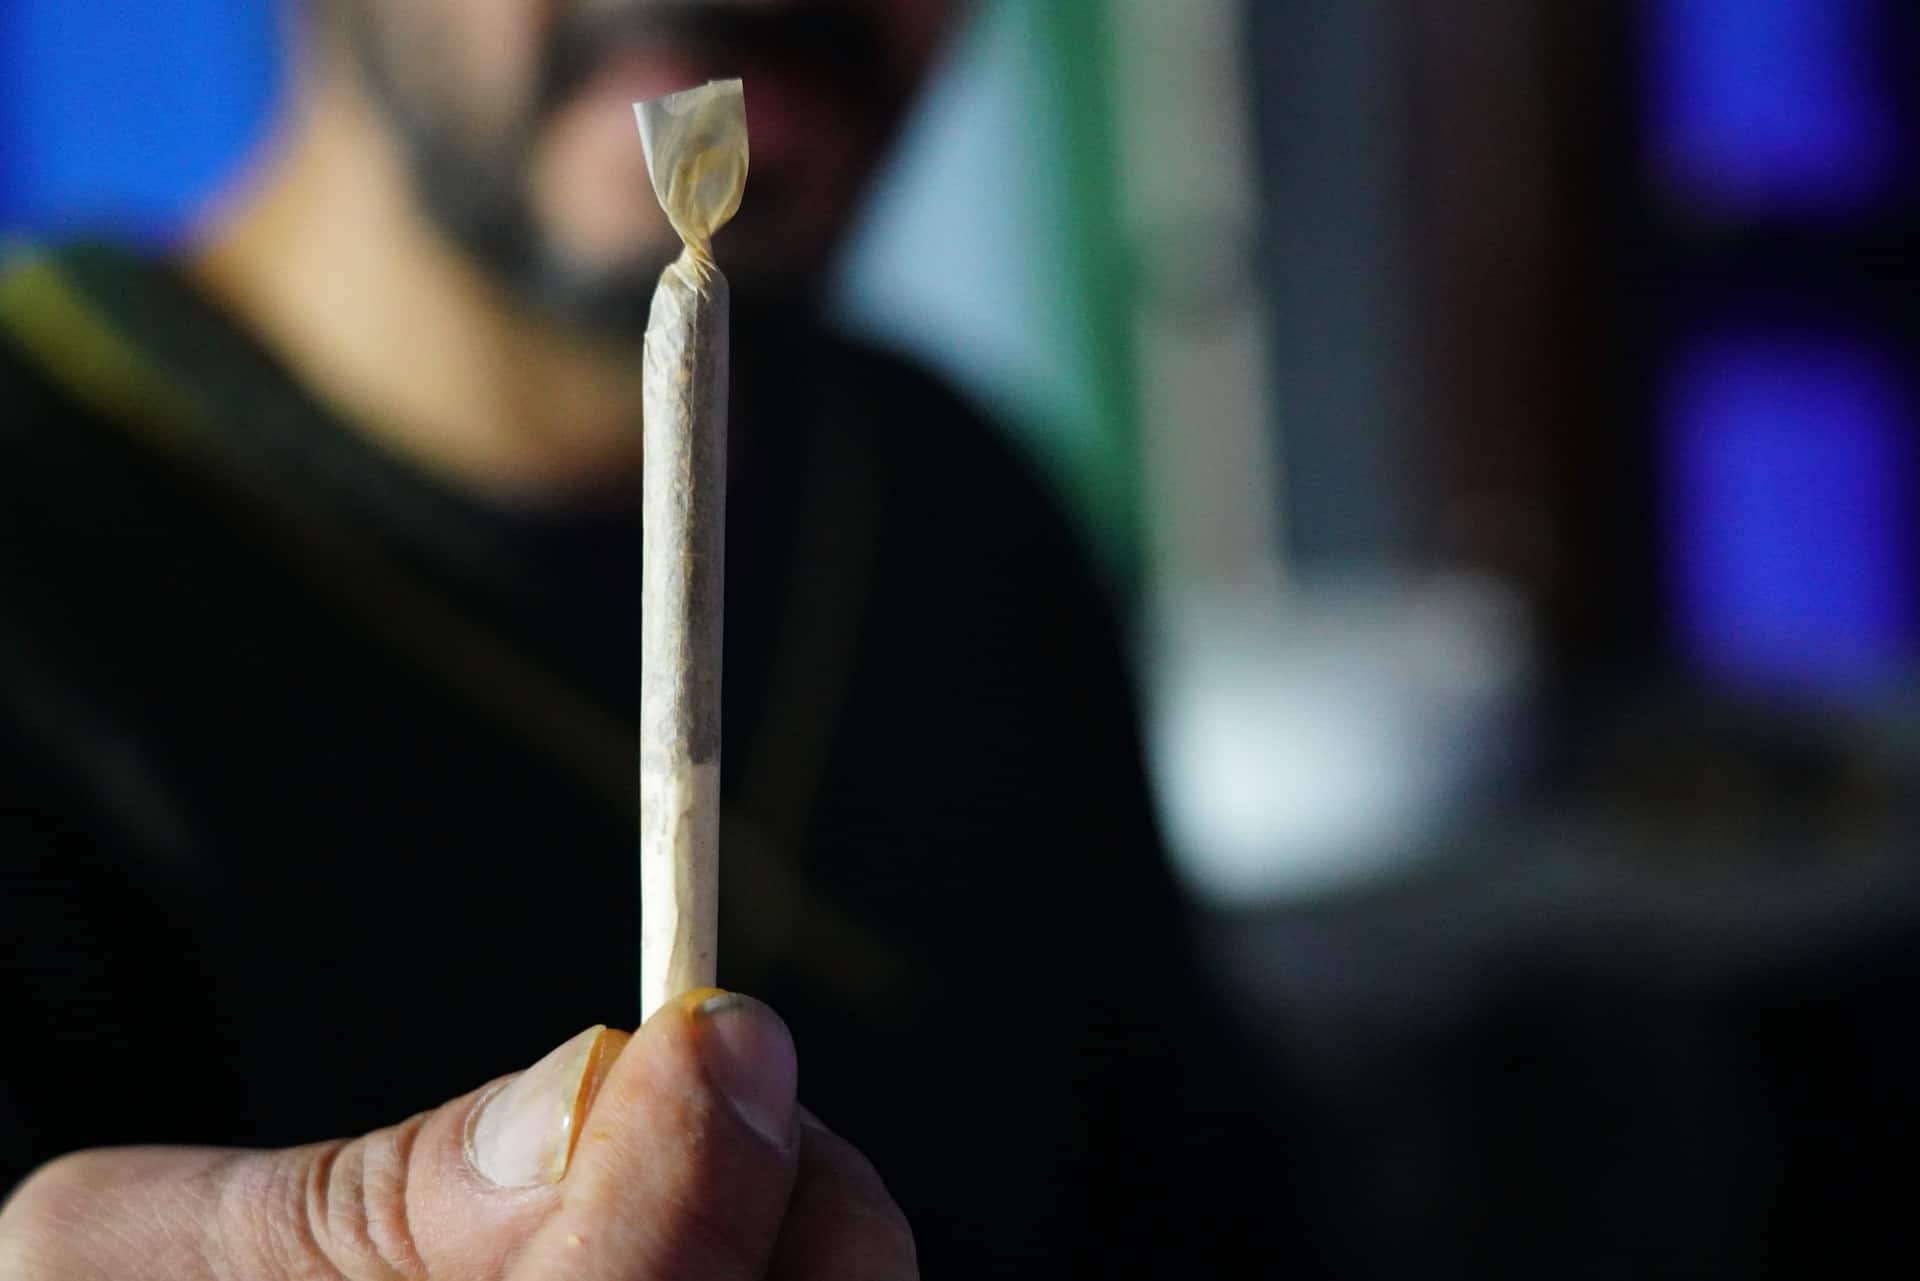 A man holds up an unlit joint